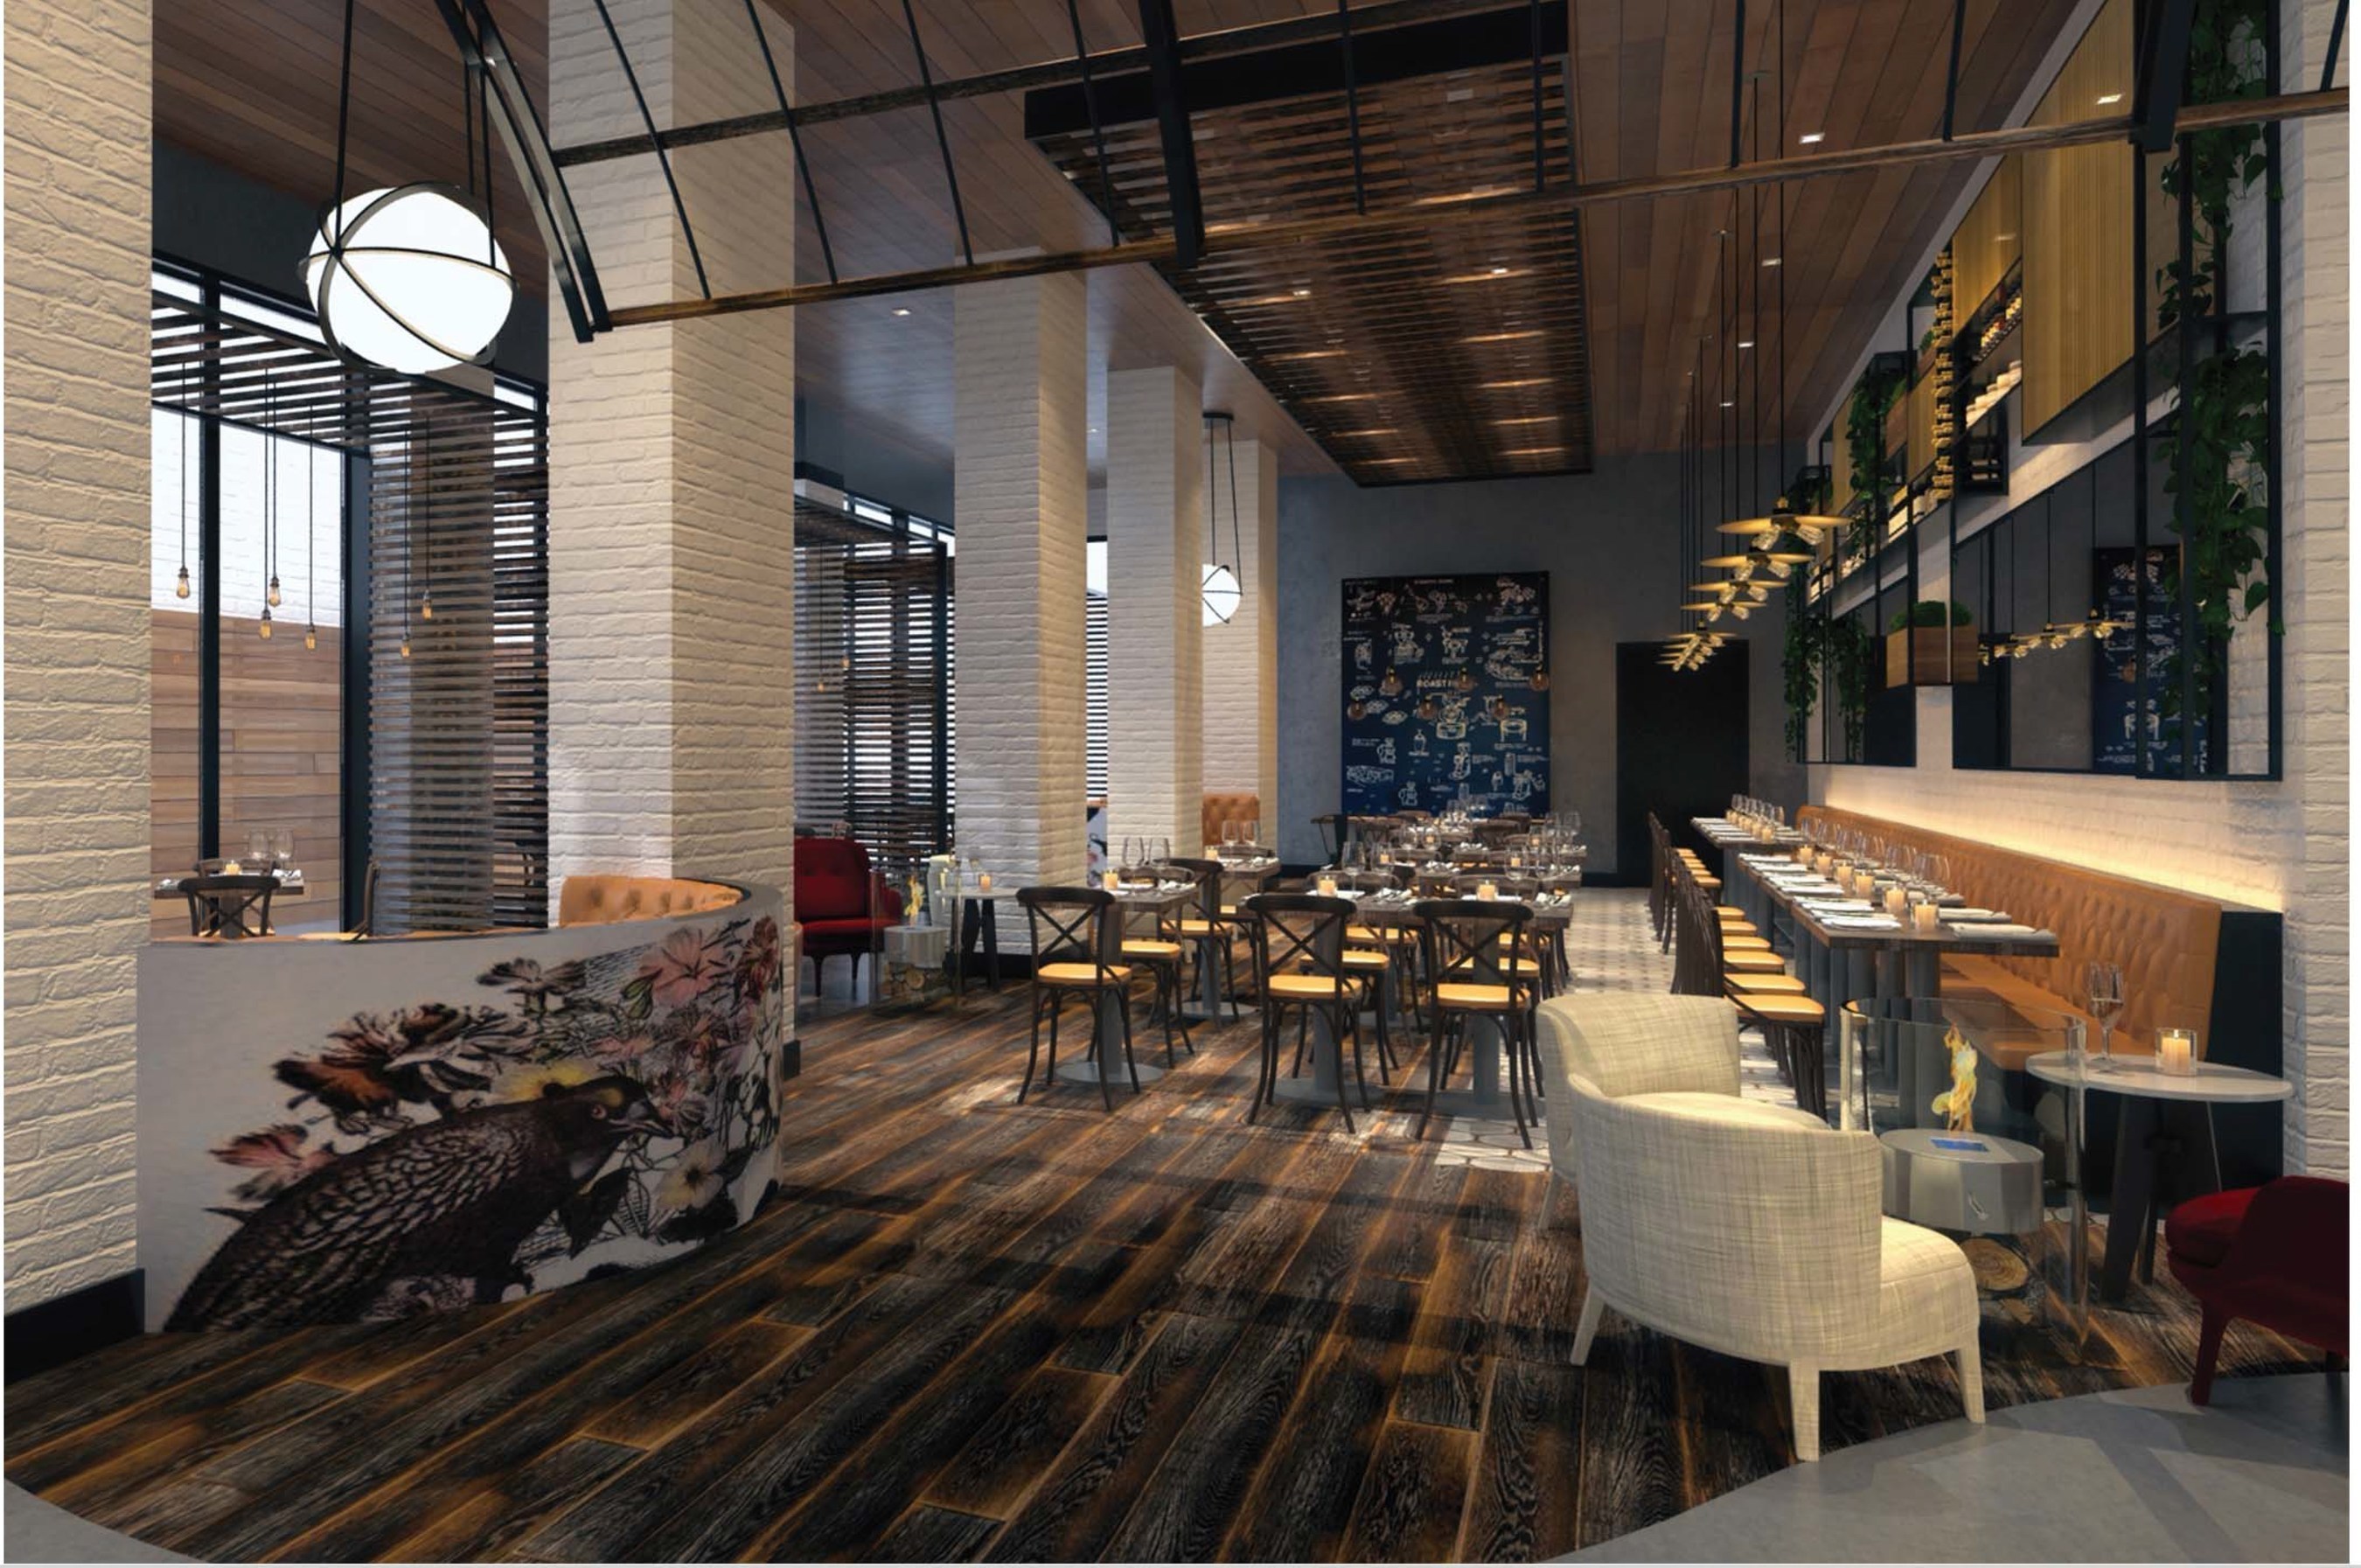 Rendering of Magnolia Restaurant, which will join the Addison Hospitality Group portfolio when it opens in December 2016